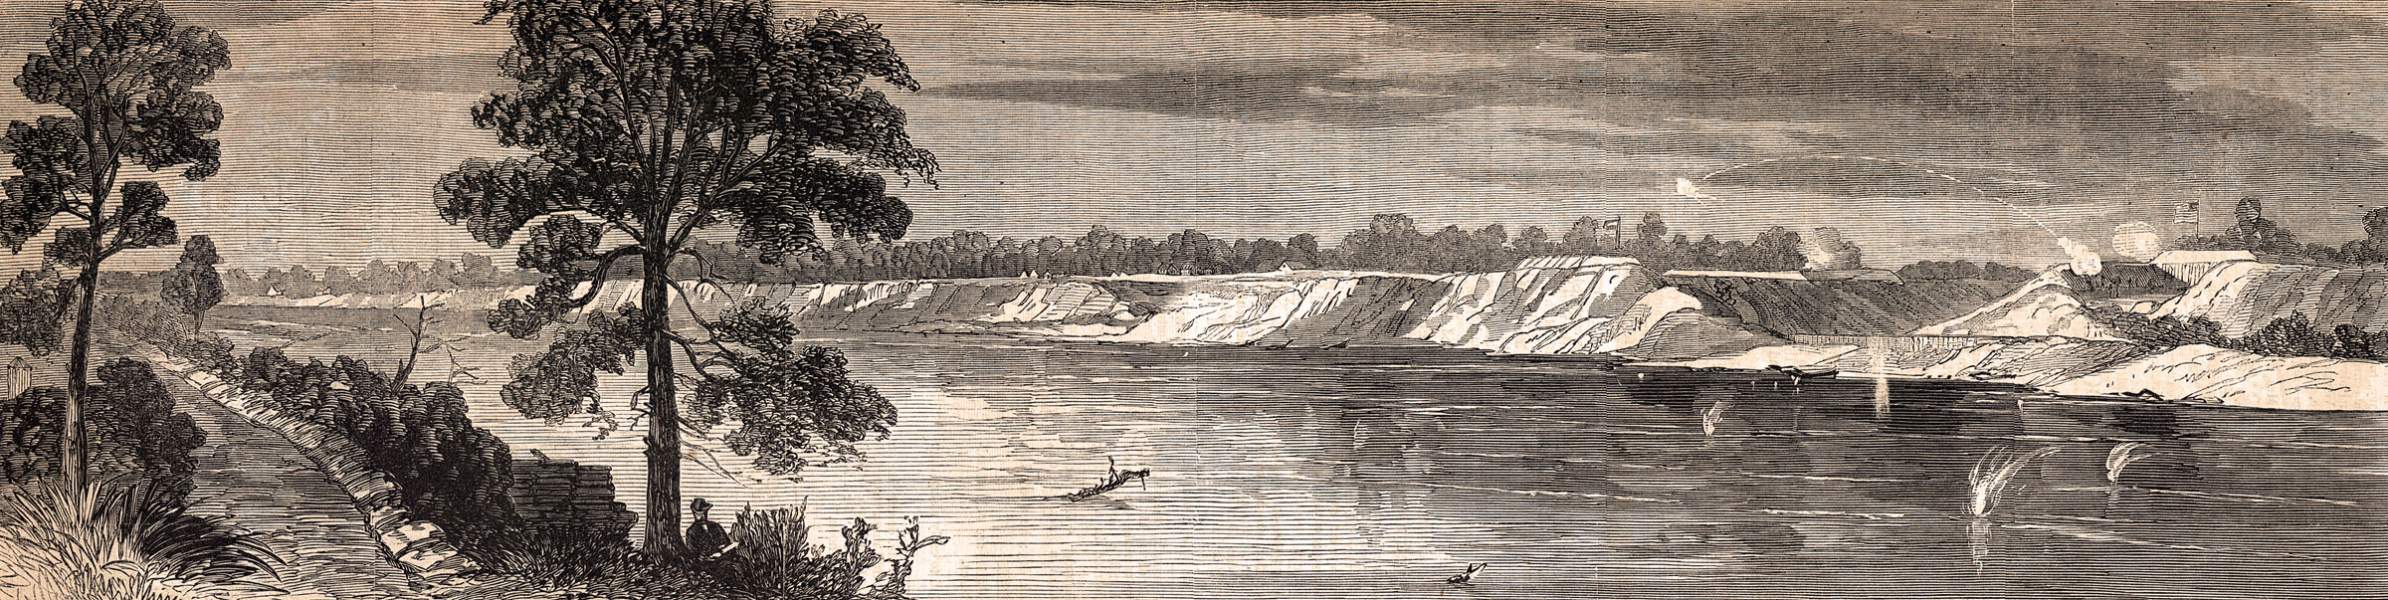 Port Hudson from the western bank of the Mississippi, July 1863, artist's impression, zoomable image